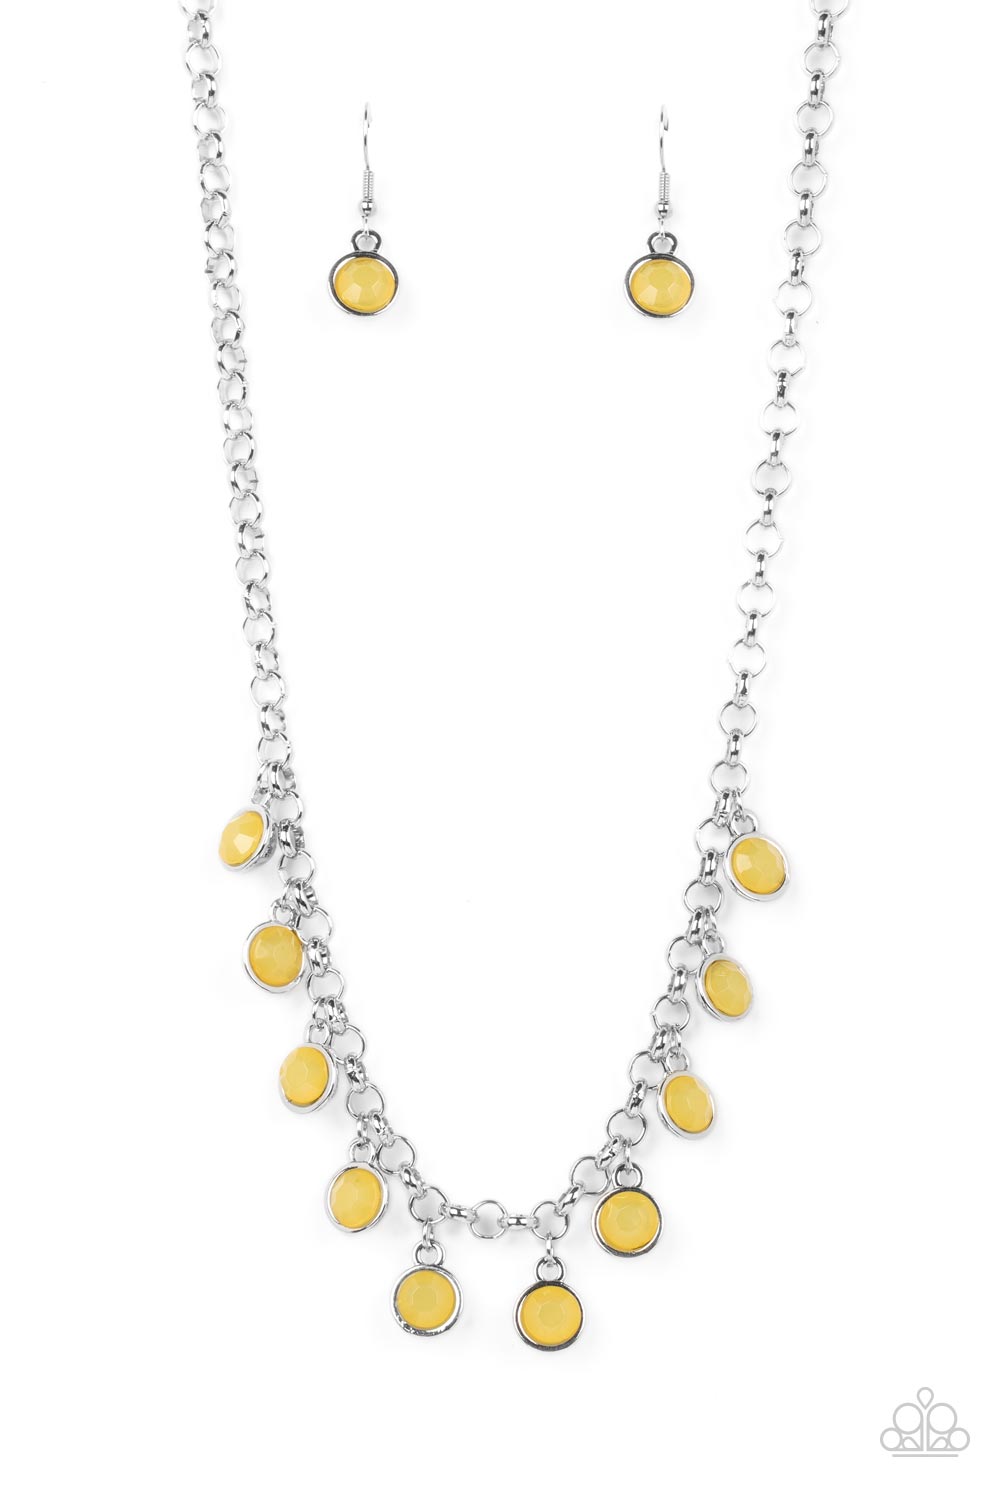 Moonbeam Magic Paparazzi Accessories Necklace with Earrings Yellow